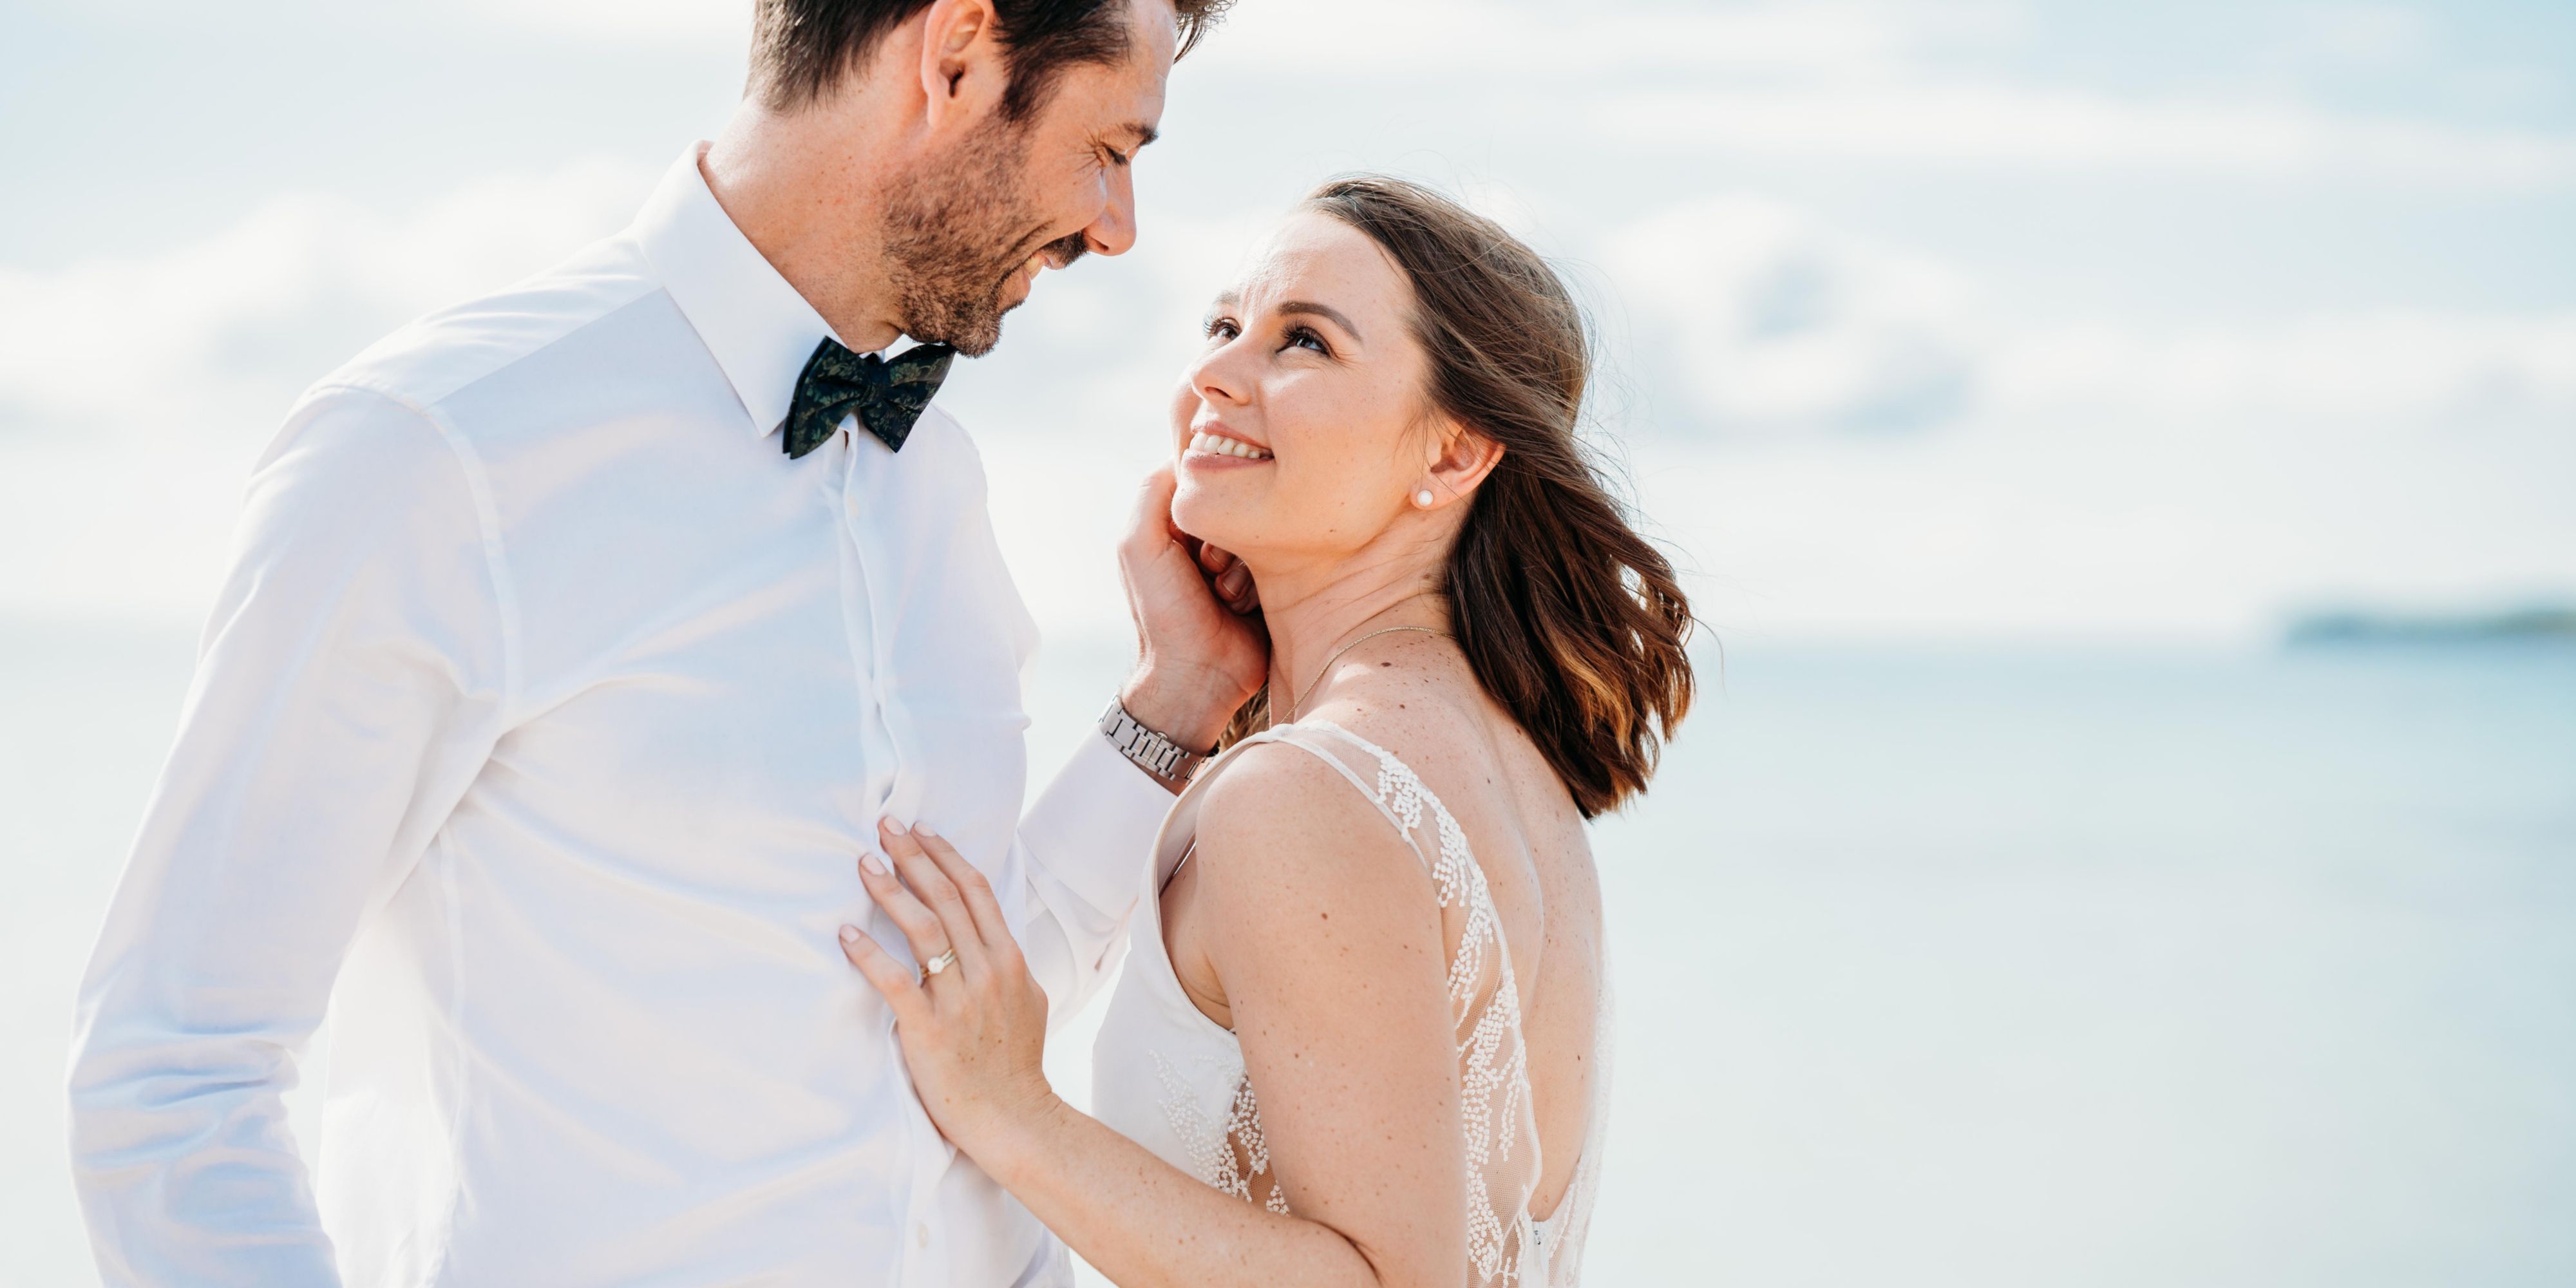 Nothing says destination wedding quite like exchanging vows against the backdrop of the azure South Pacific stretching out to the horizon, framed by palm trees and a pristine sandy beach.